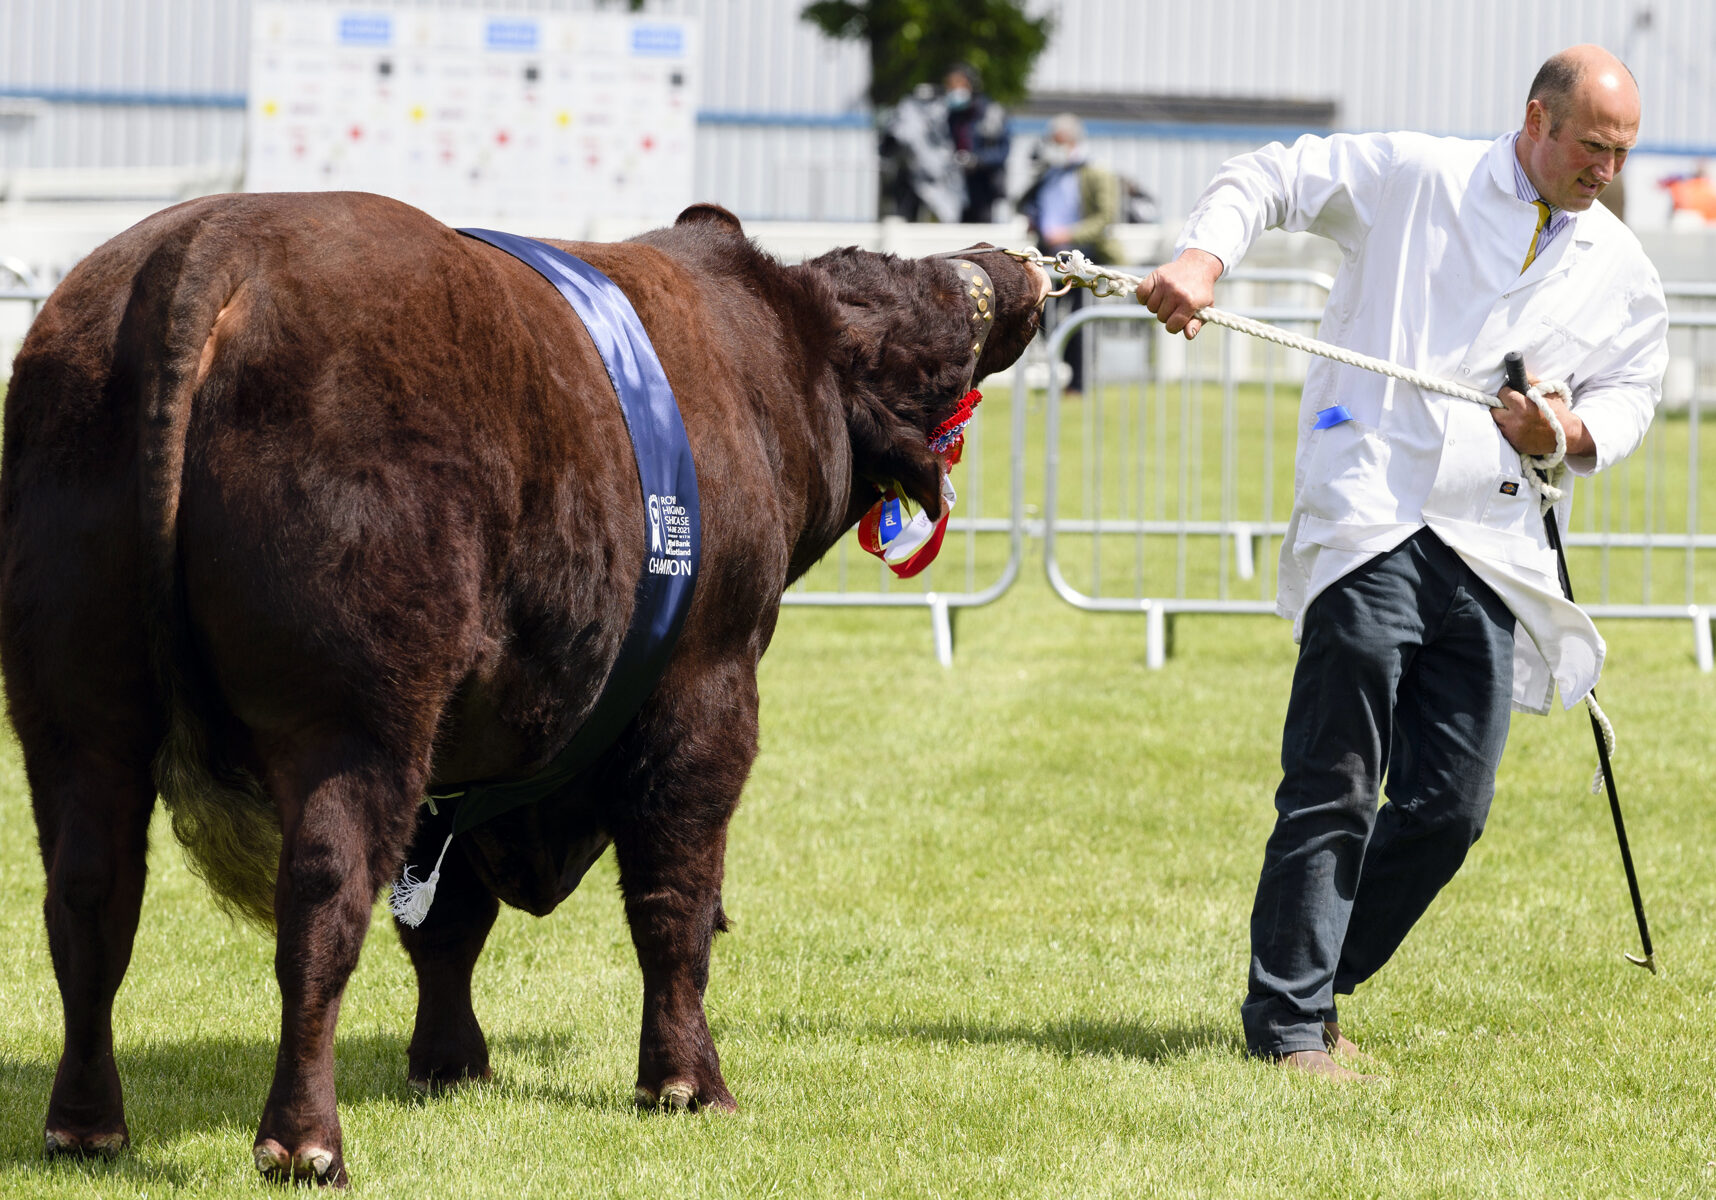 One competitor at the Royal Highland Showcase this year (Photo: Ian Georgeson)